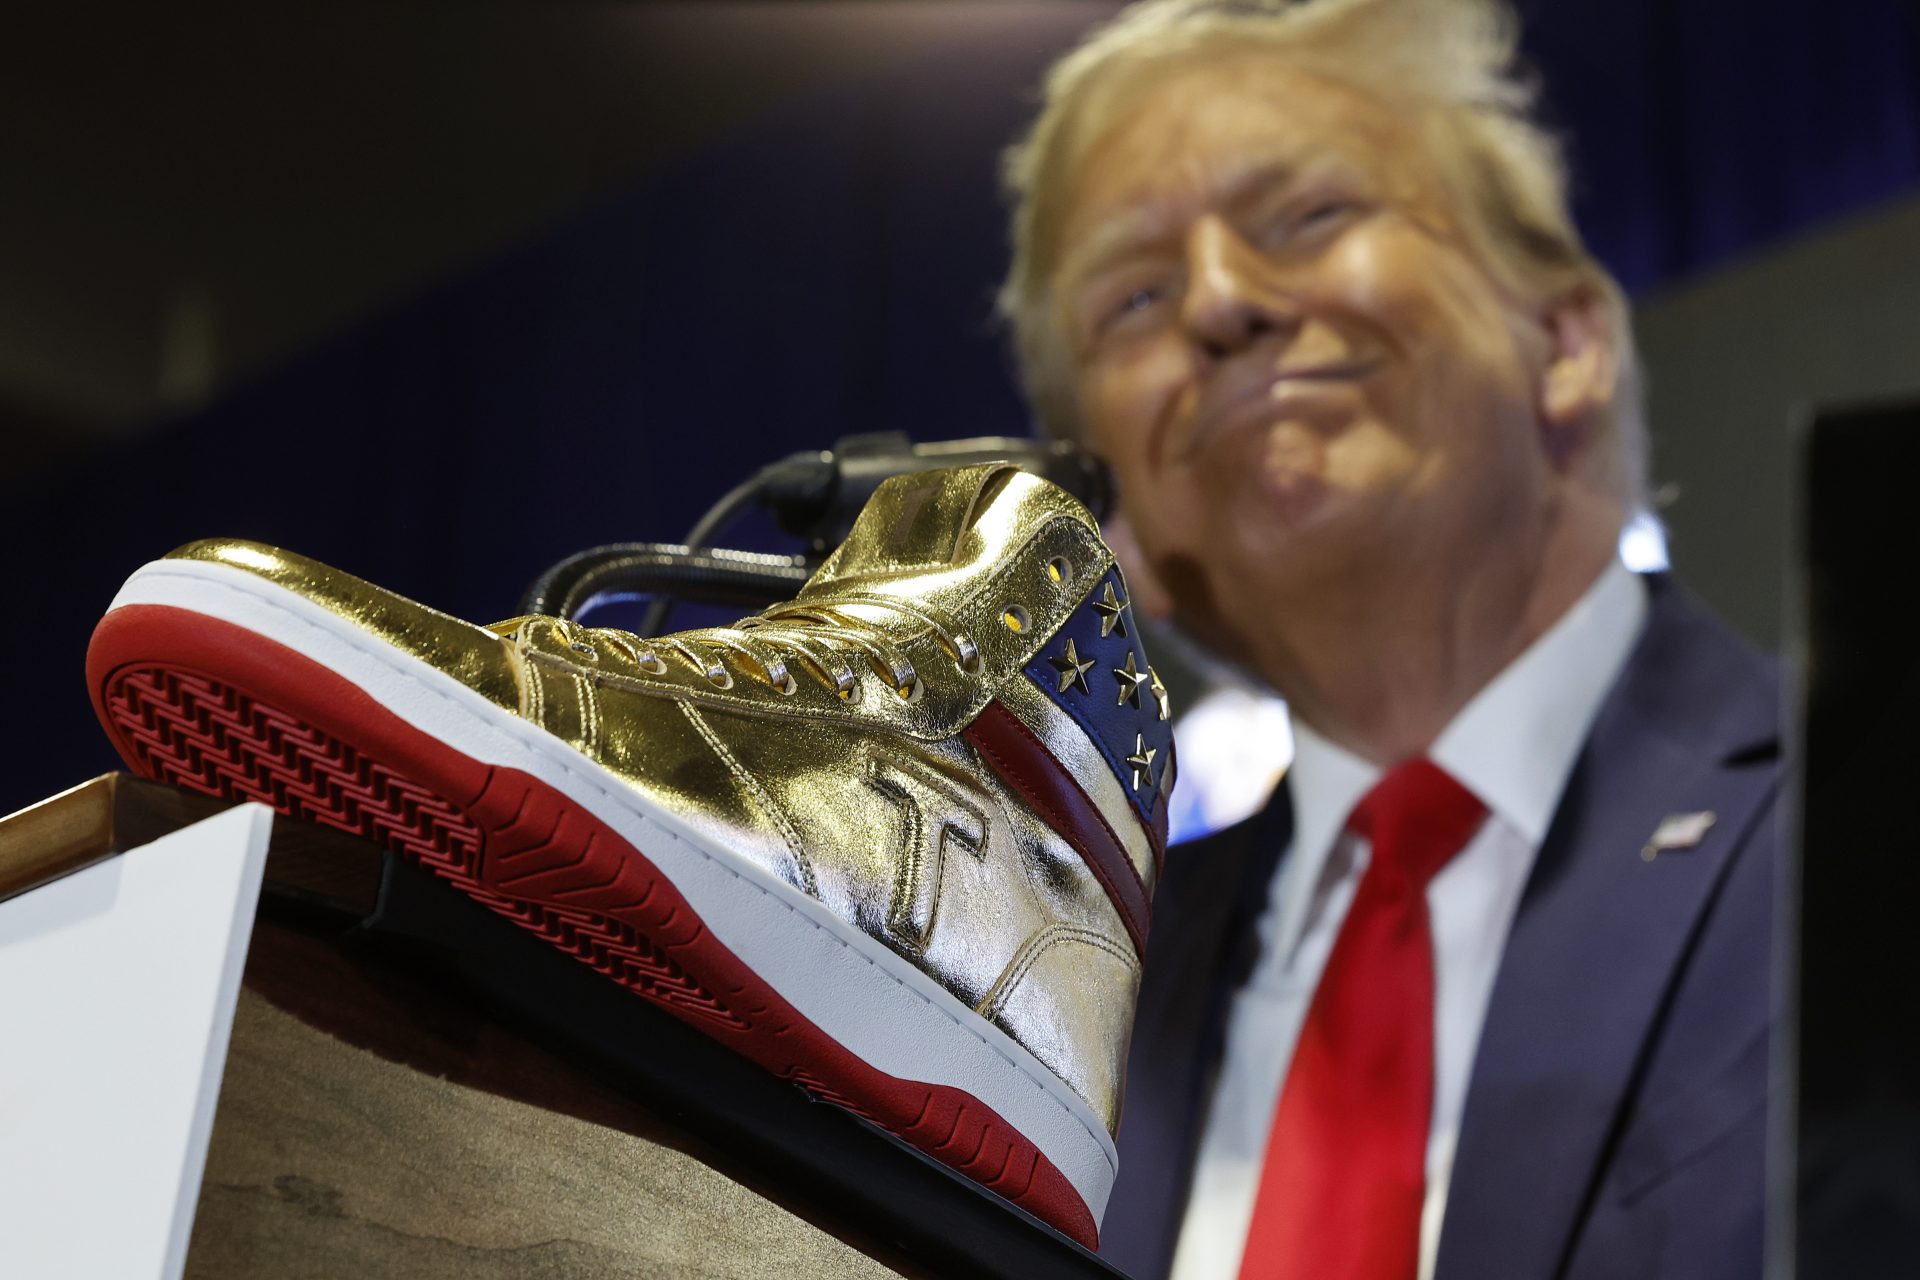 Naturally Trump's sneakers are gold....